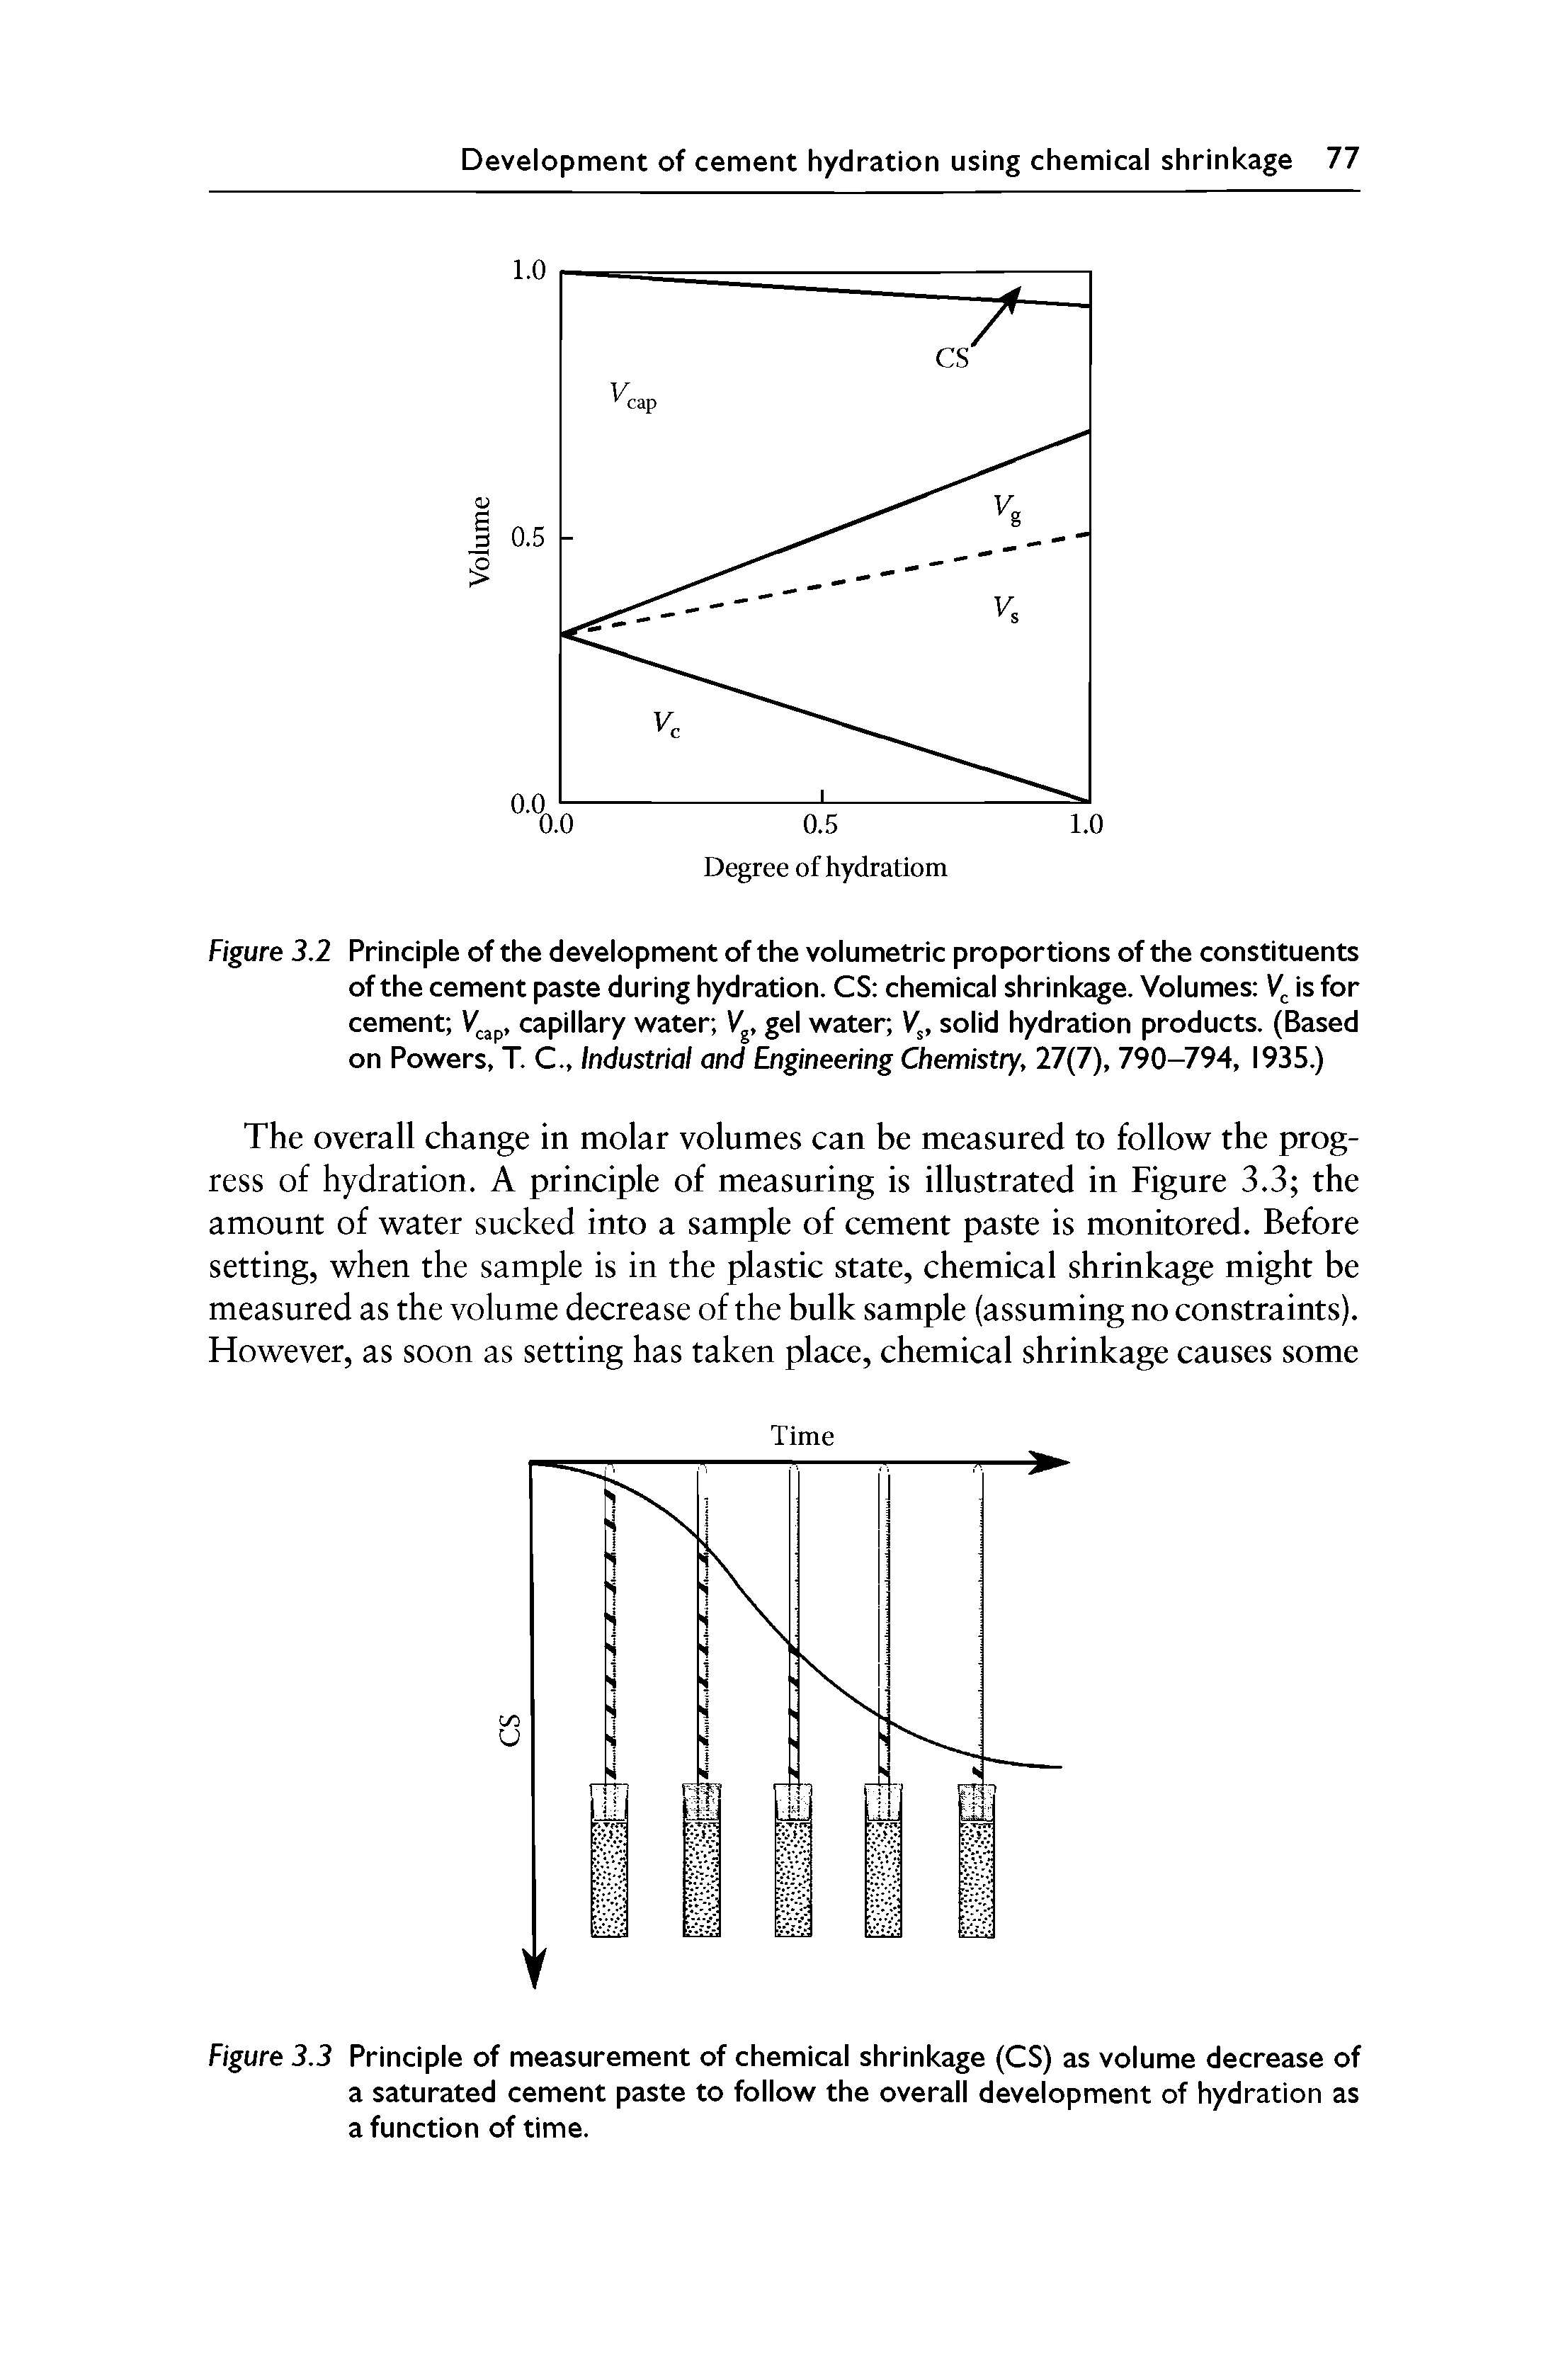 Figure 3.2 Principle of the development of the volumetric proportions of the constituents of the cement paste during hydration. CS chemical shrinkage. Volumes is for cement V p, capillary water gel water, V, solid hydration products. (Based on Powers, T. C., Industrial and Engineering Chemistry, 27(7), 790-794, 1935.)...